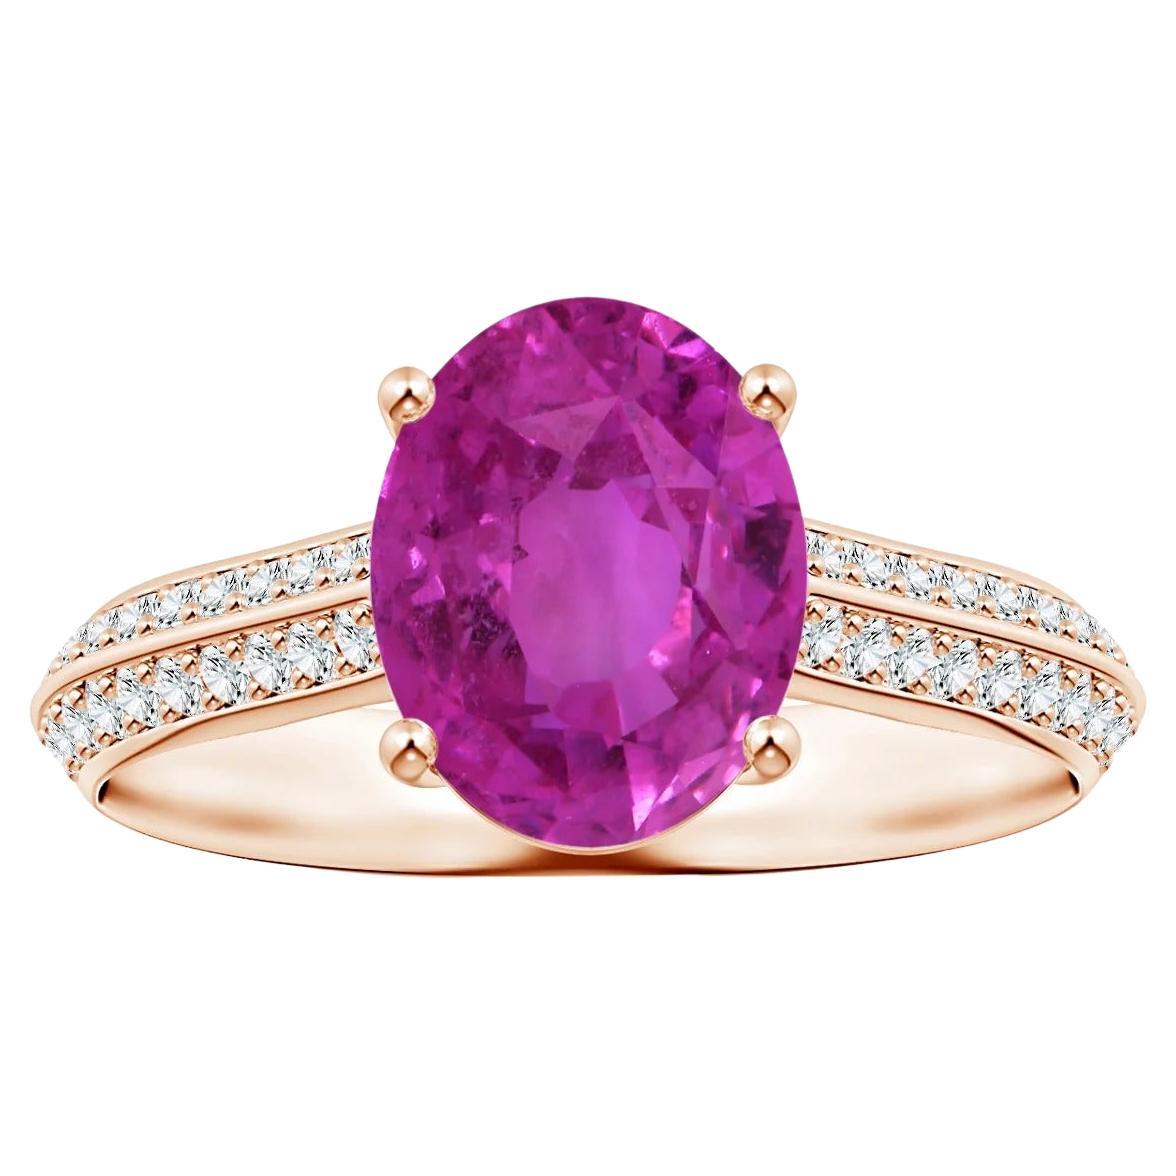 For Sale:  GIA Certified Pink Sapphire Knife Edge Ring in Rose Gold with Diamonds